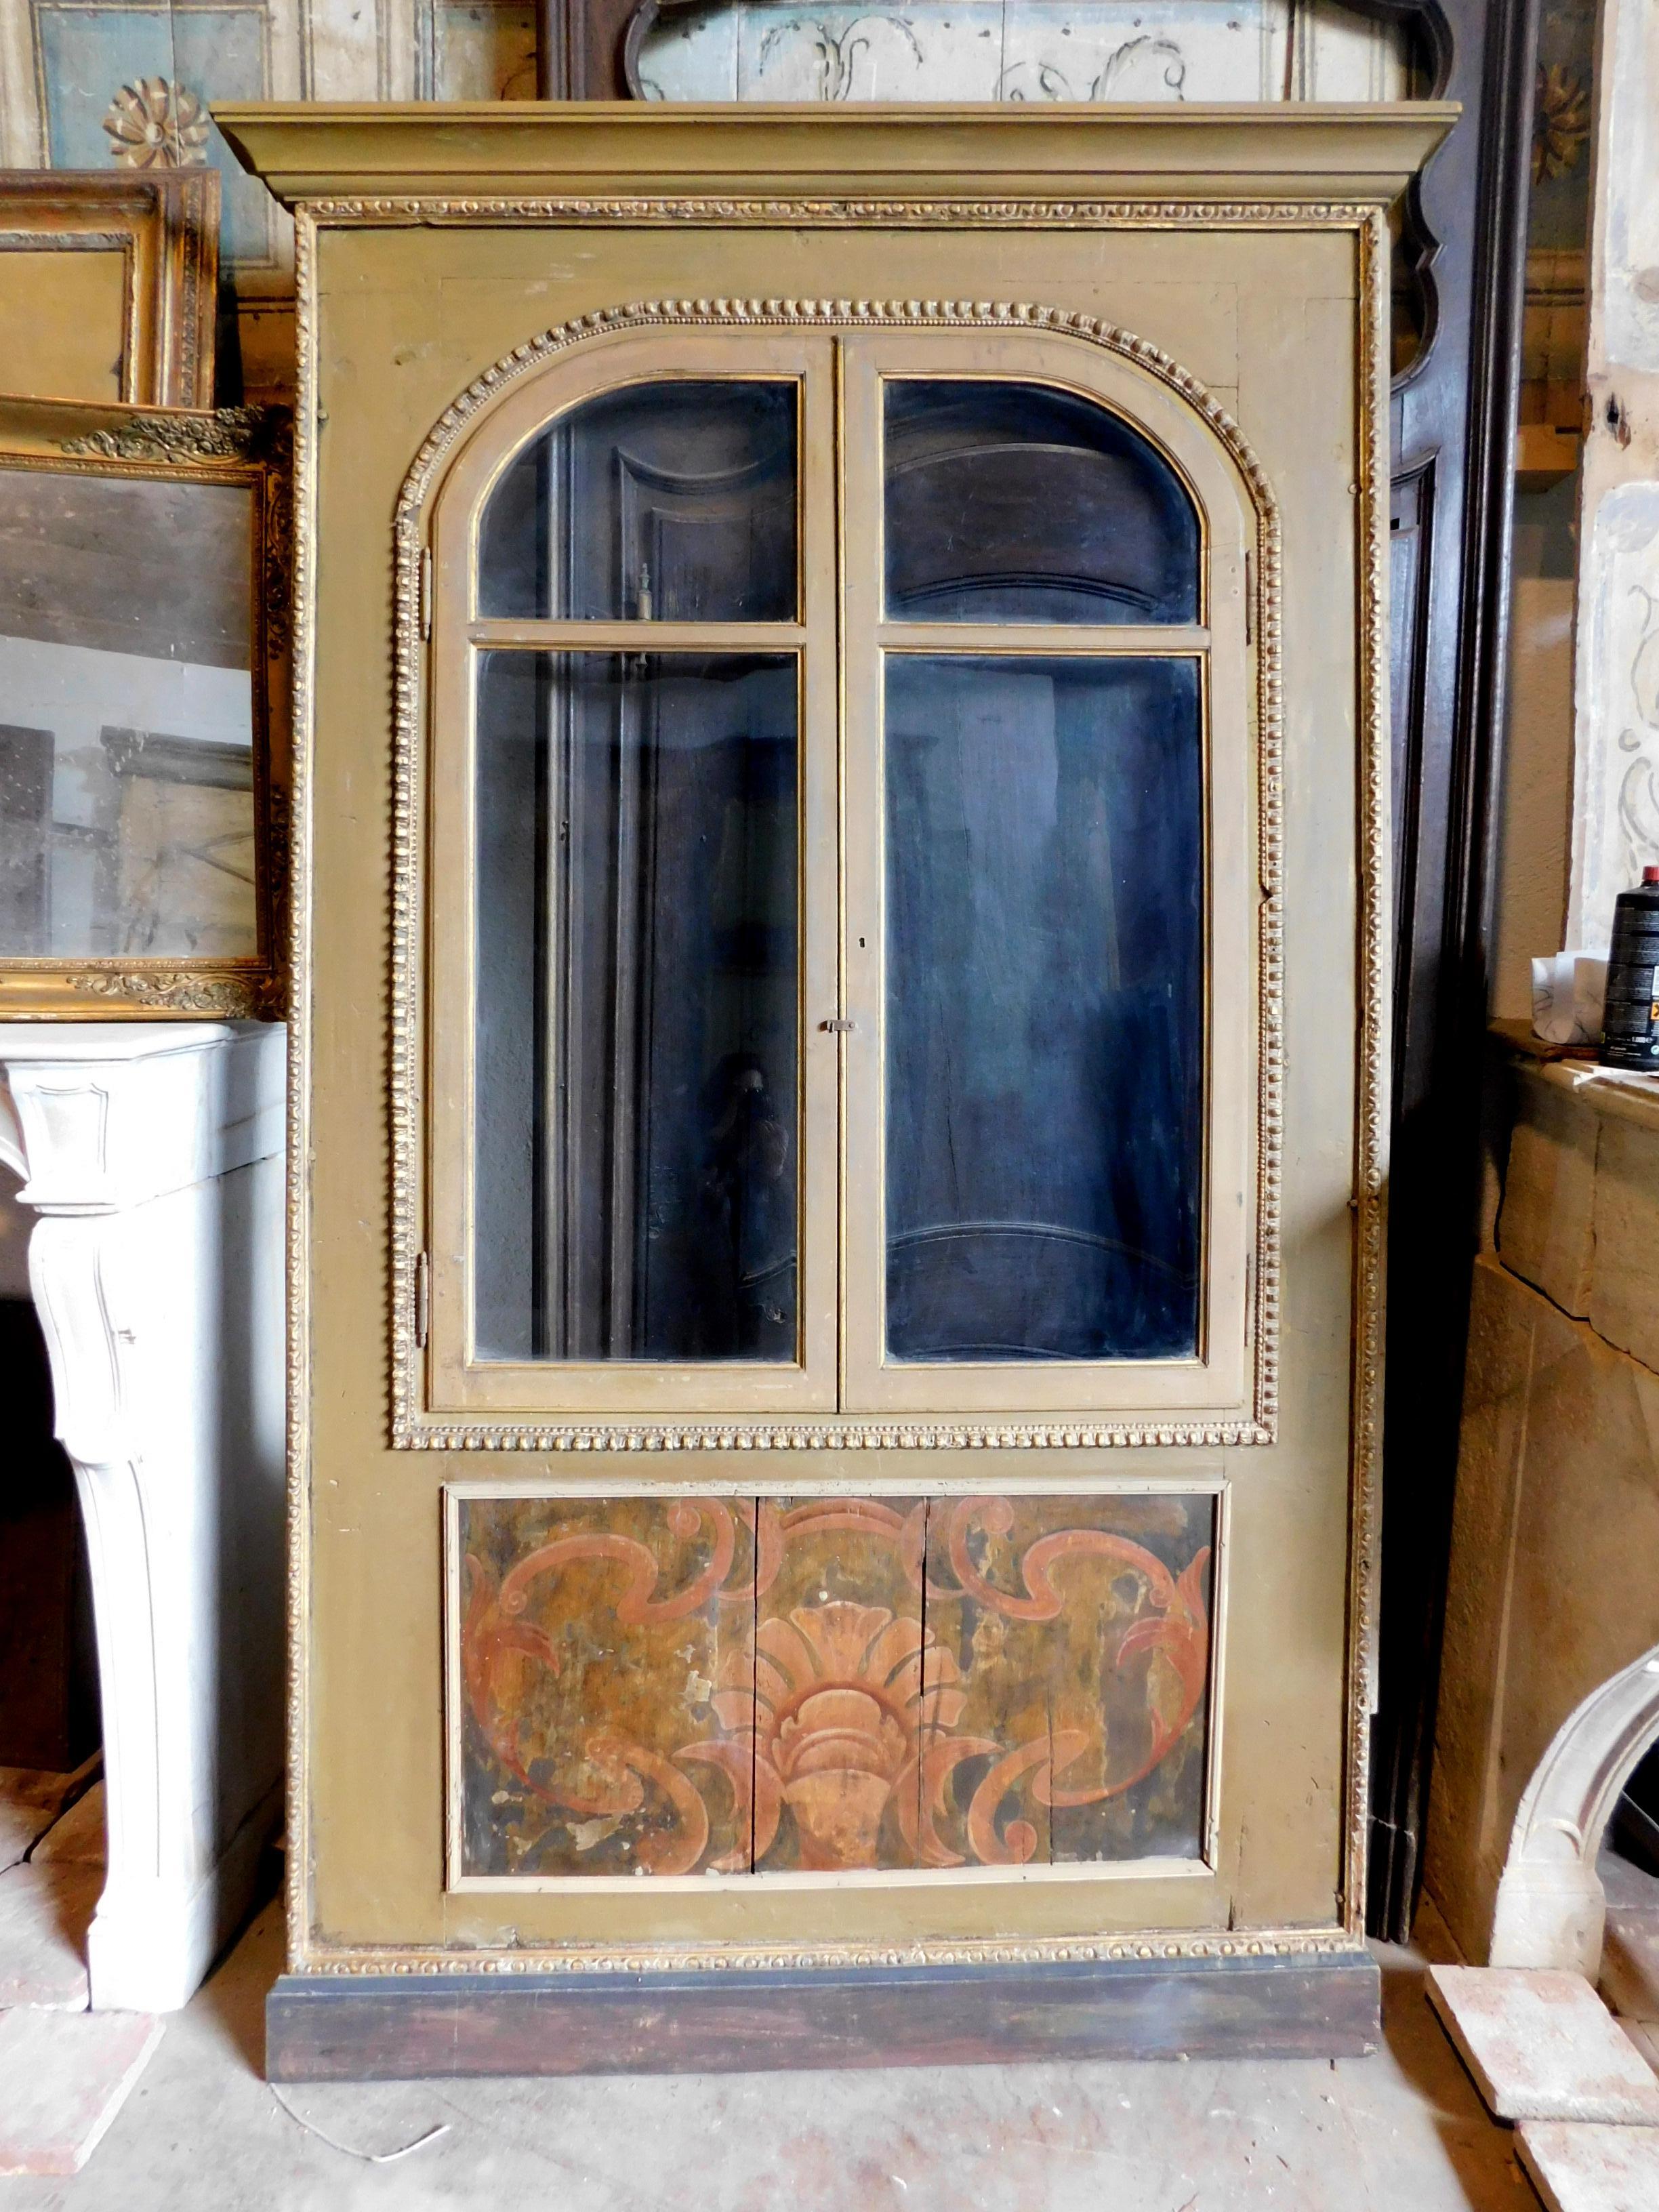 Antique placard, built-in wardrobe, wardrobe front in the wall, in solid wood, carved and lacquered with glass doors in the upper part and painted panel as a base, hand-built and hand-painted in the middle of the 19th century in Italy.
The upper